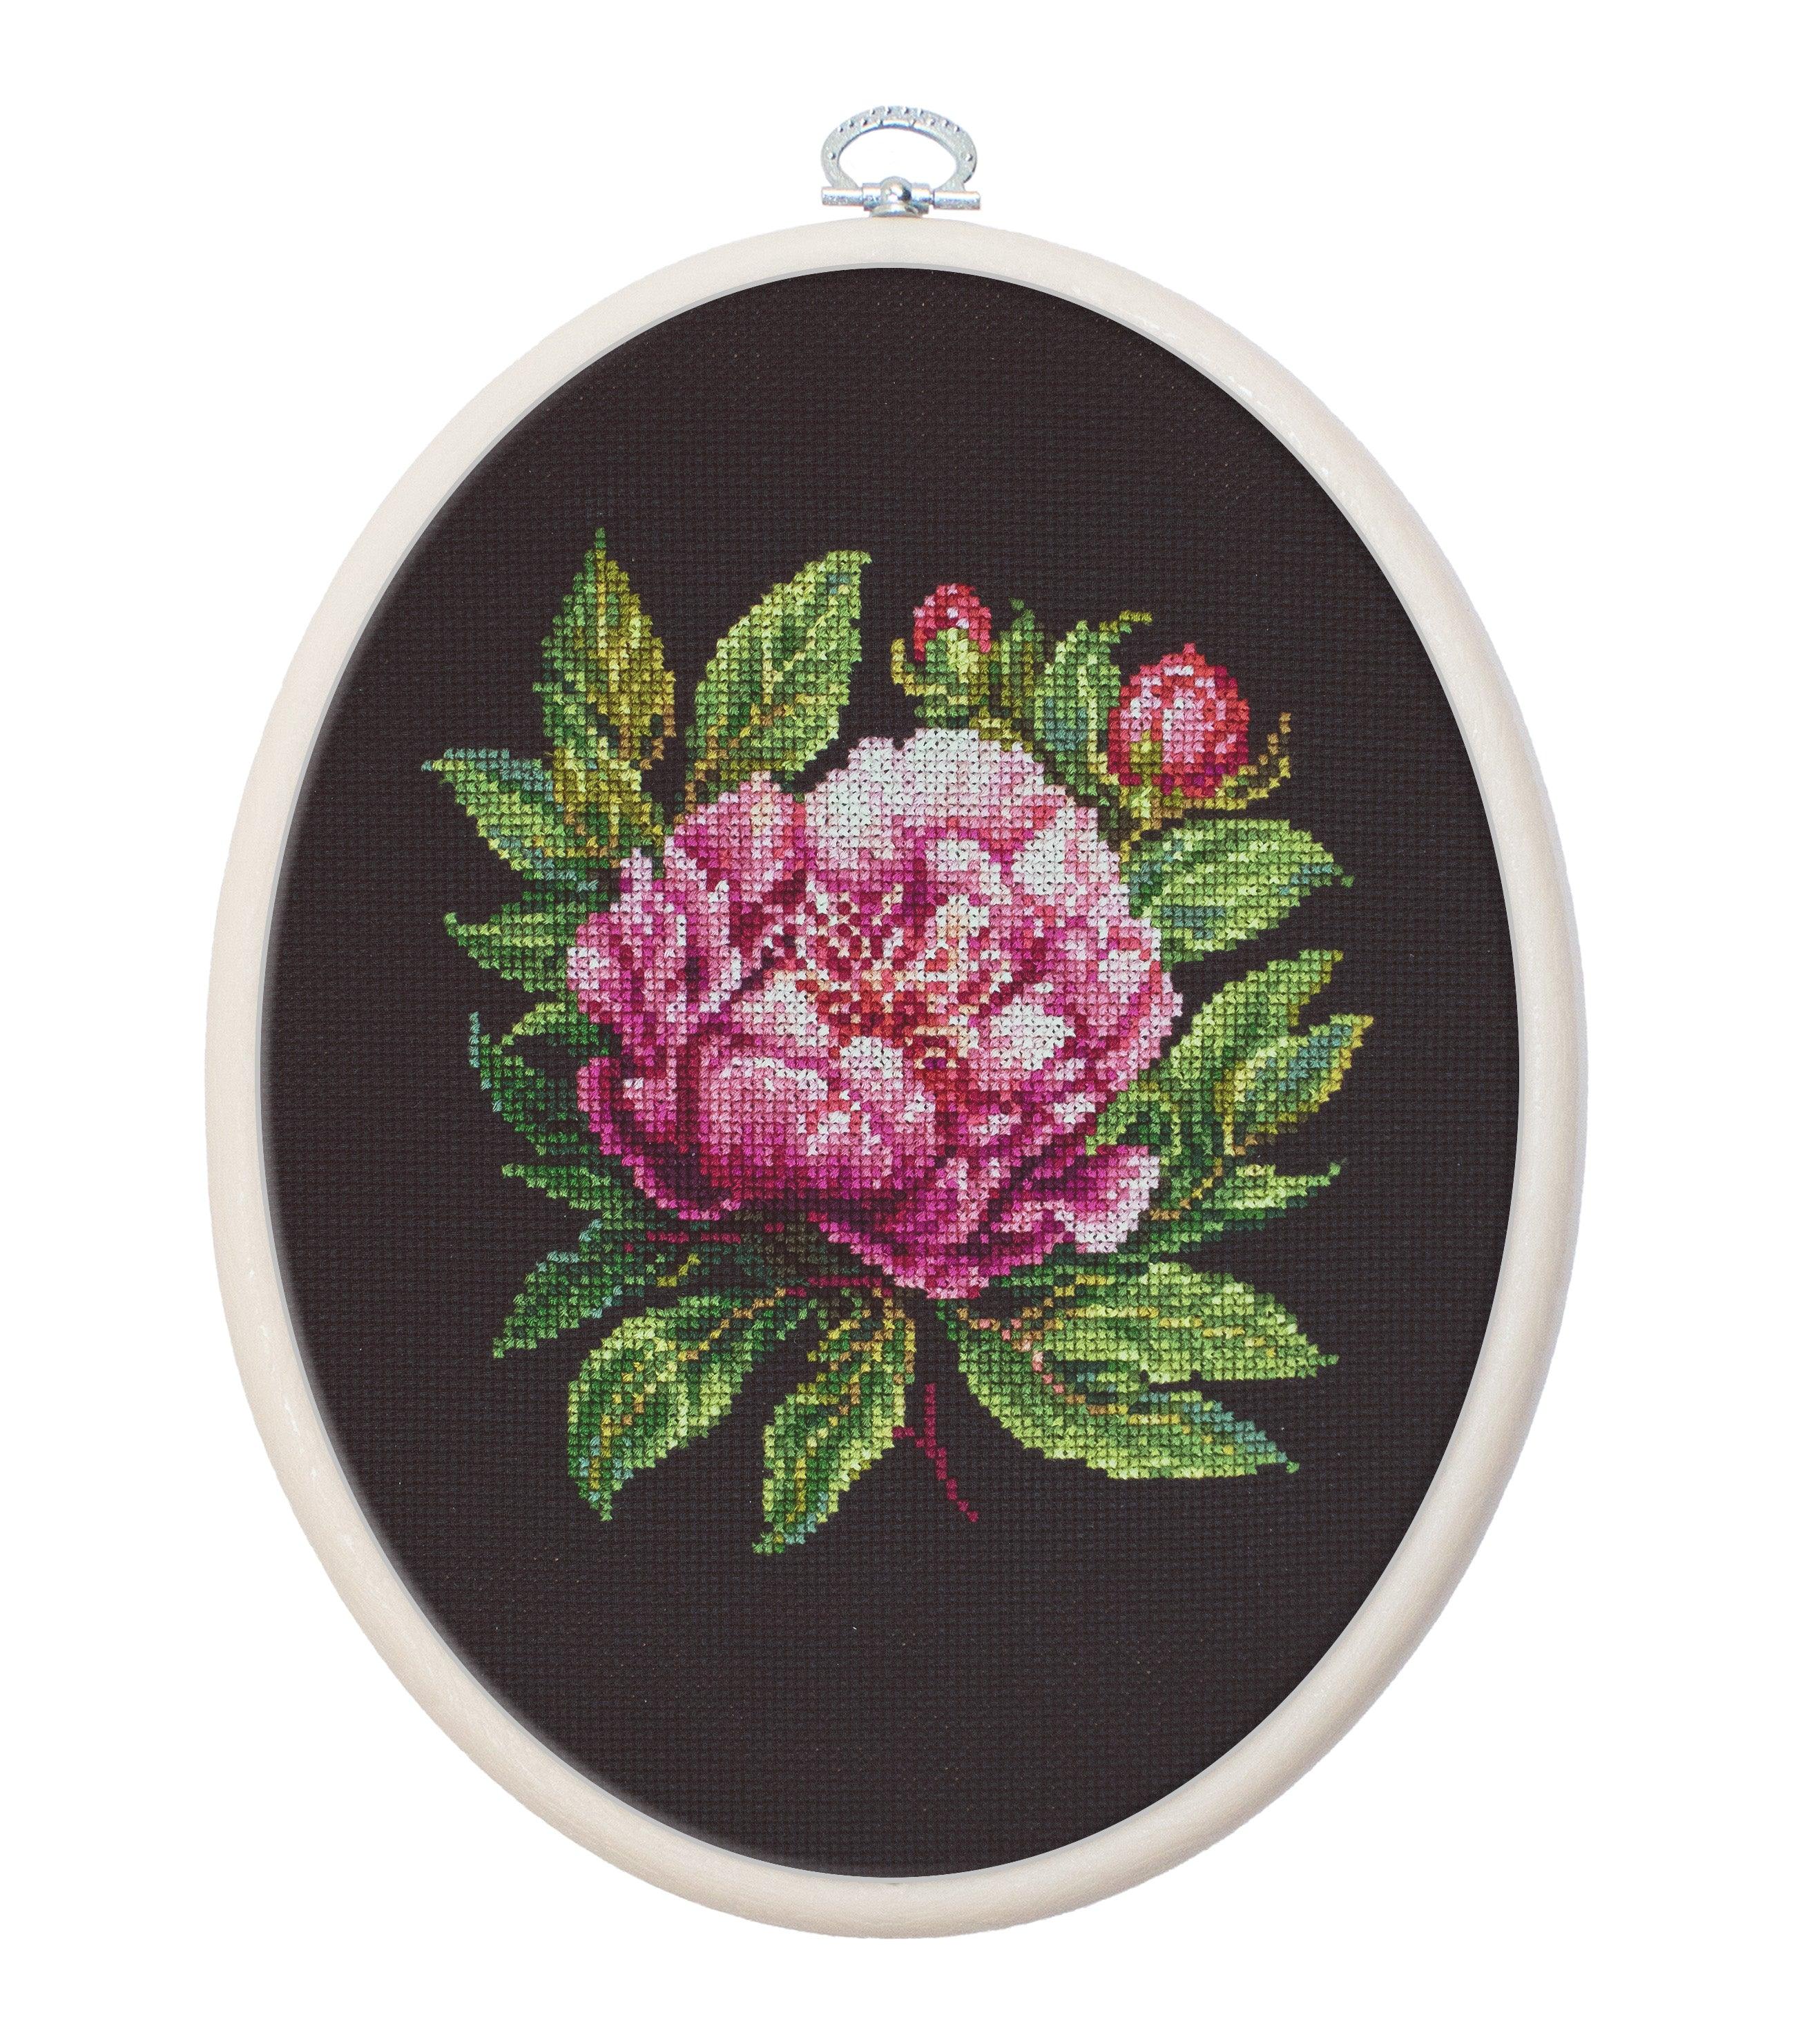 Leisure Arts Embroidery Kit 6 Coral Peony- embroidery kit for beginners -  embroidery kit for adults - cross stitch kits - cross stitch kits for